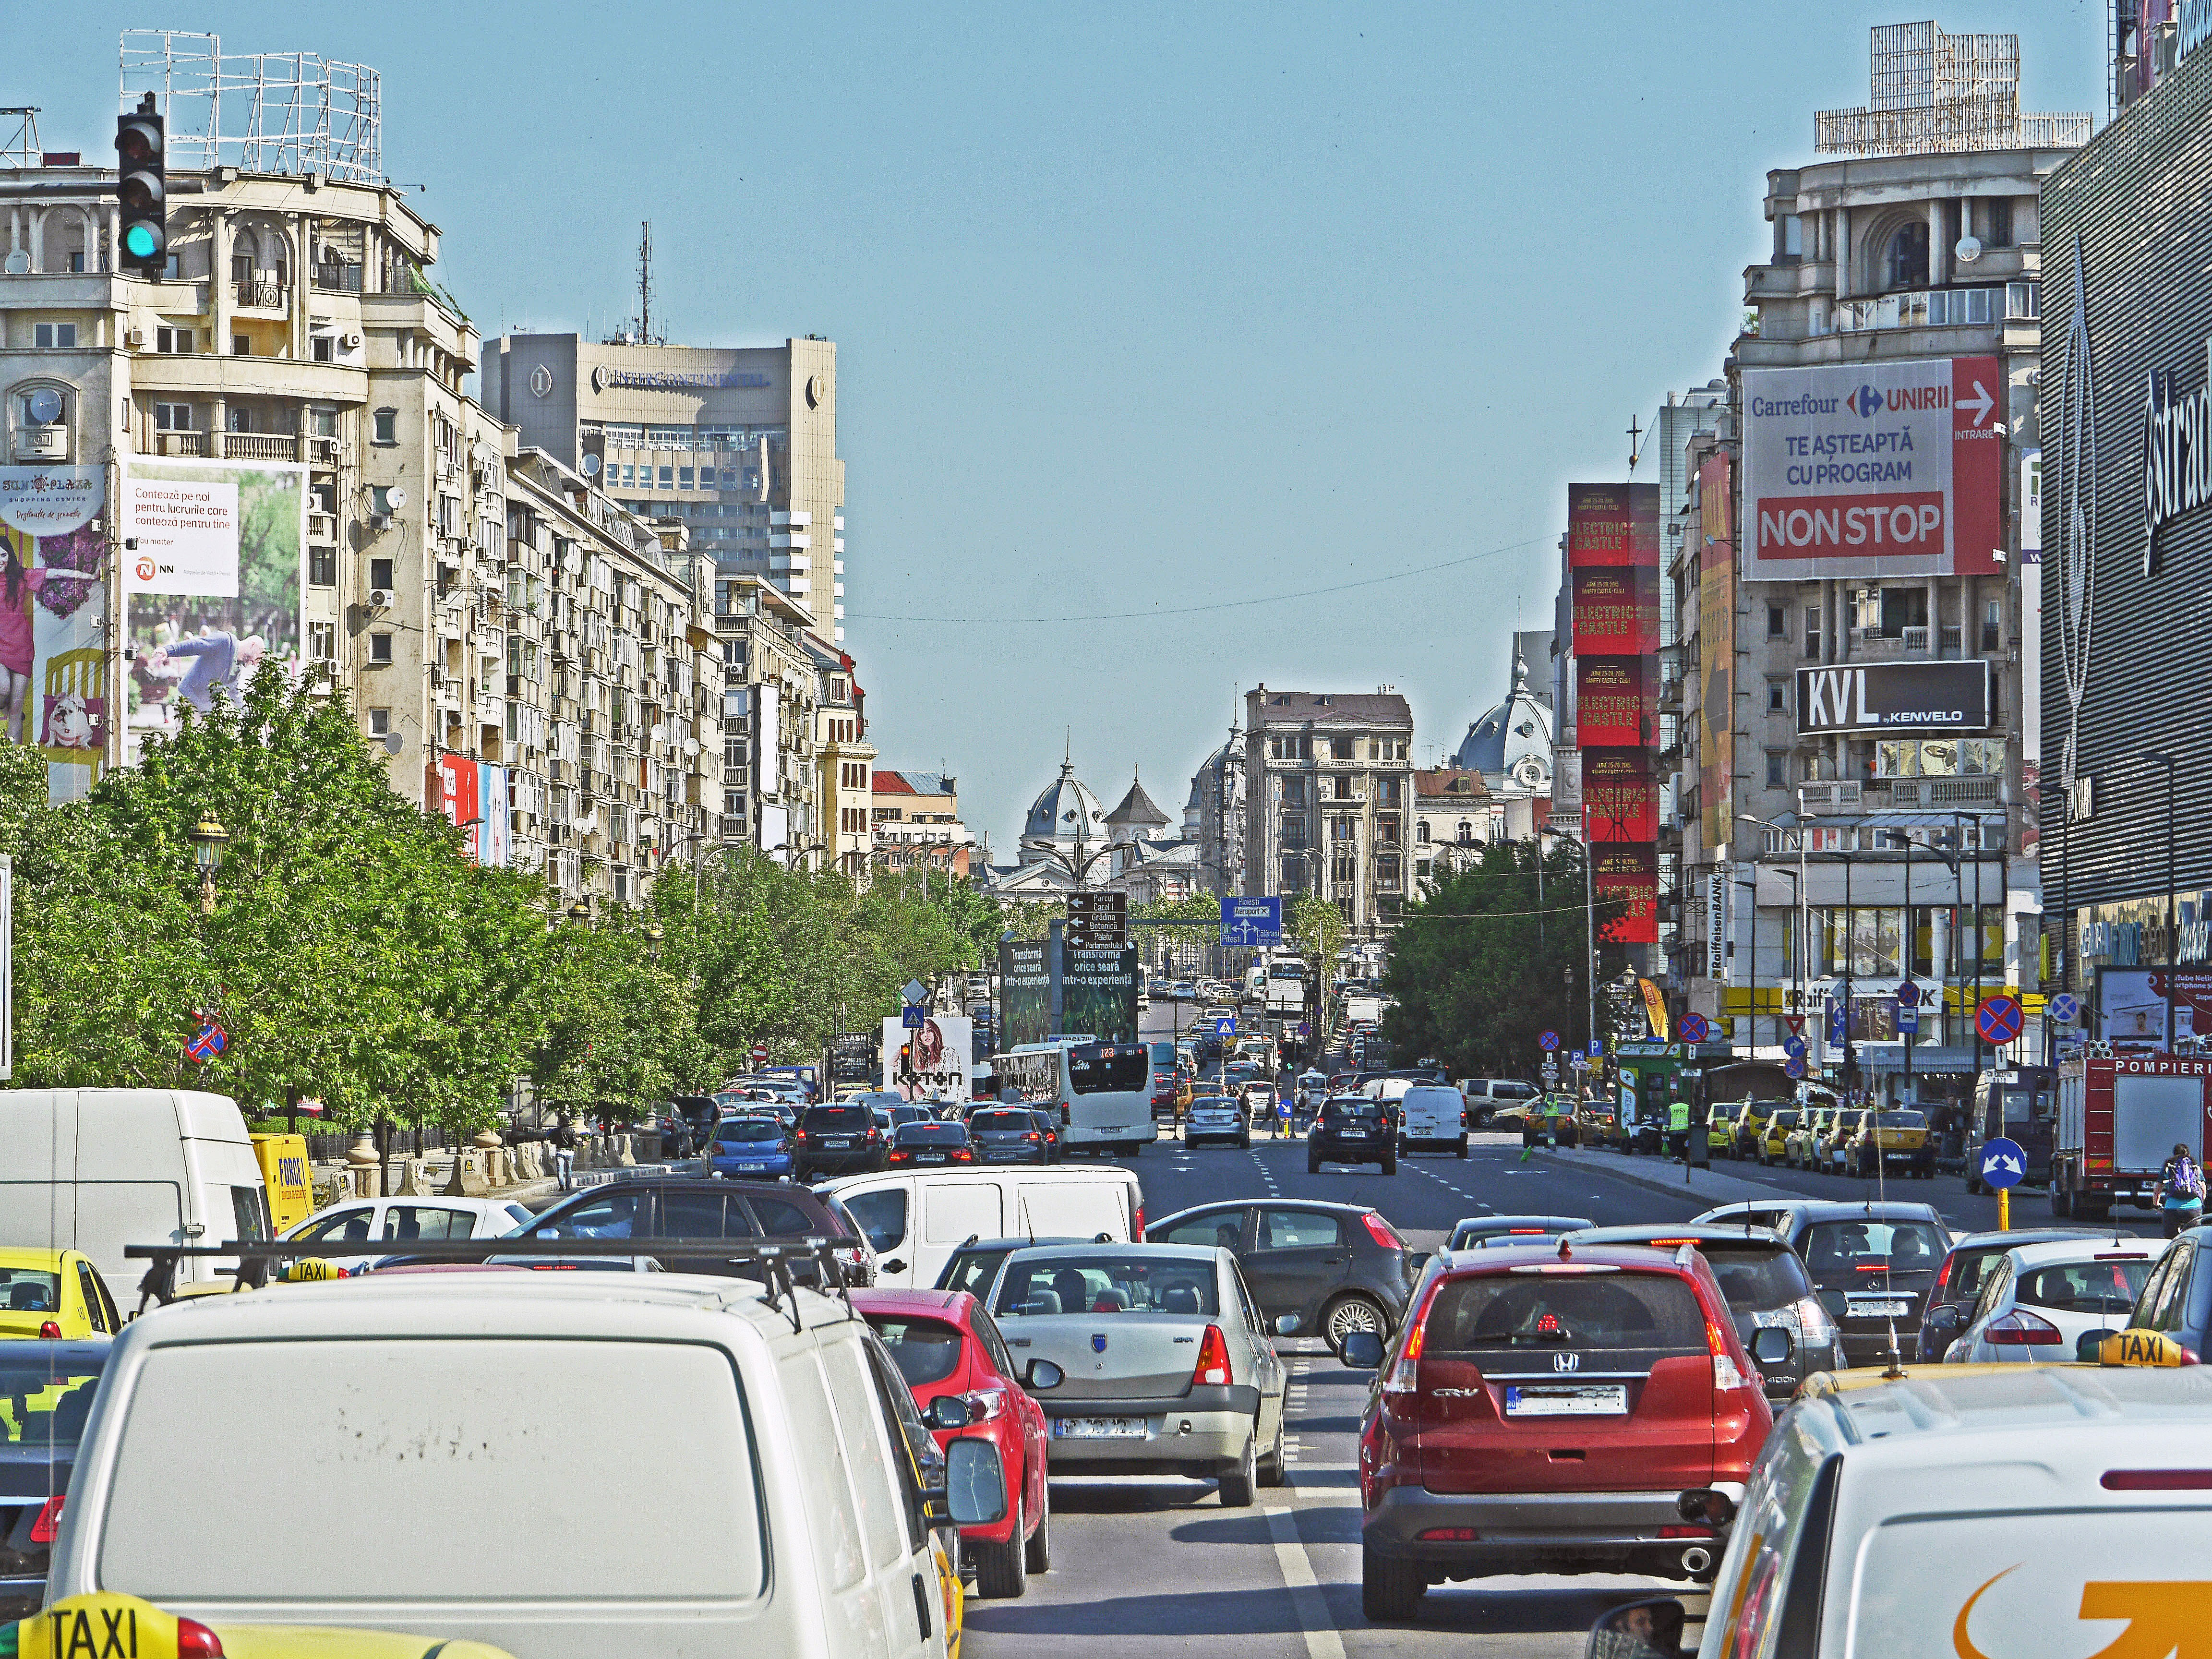 Busy street, buildings and cars in Bucharest